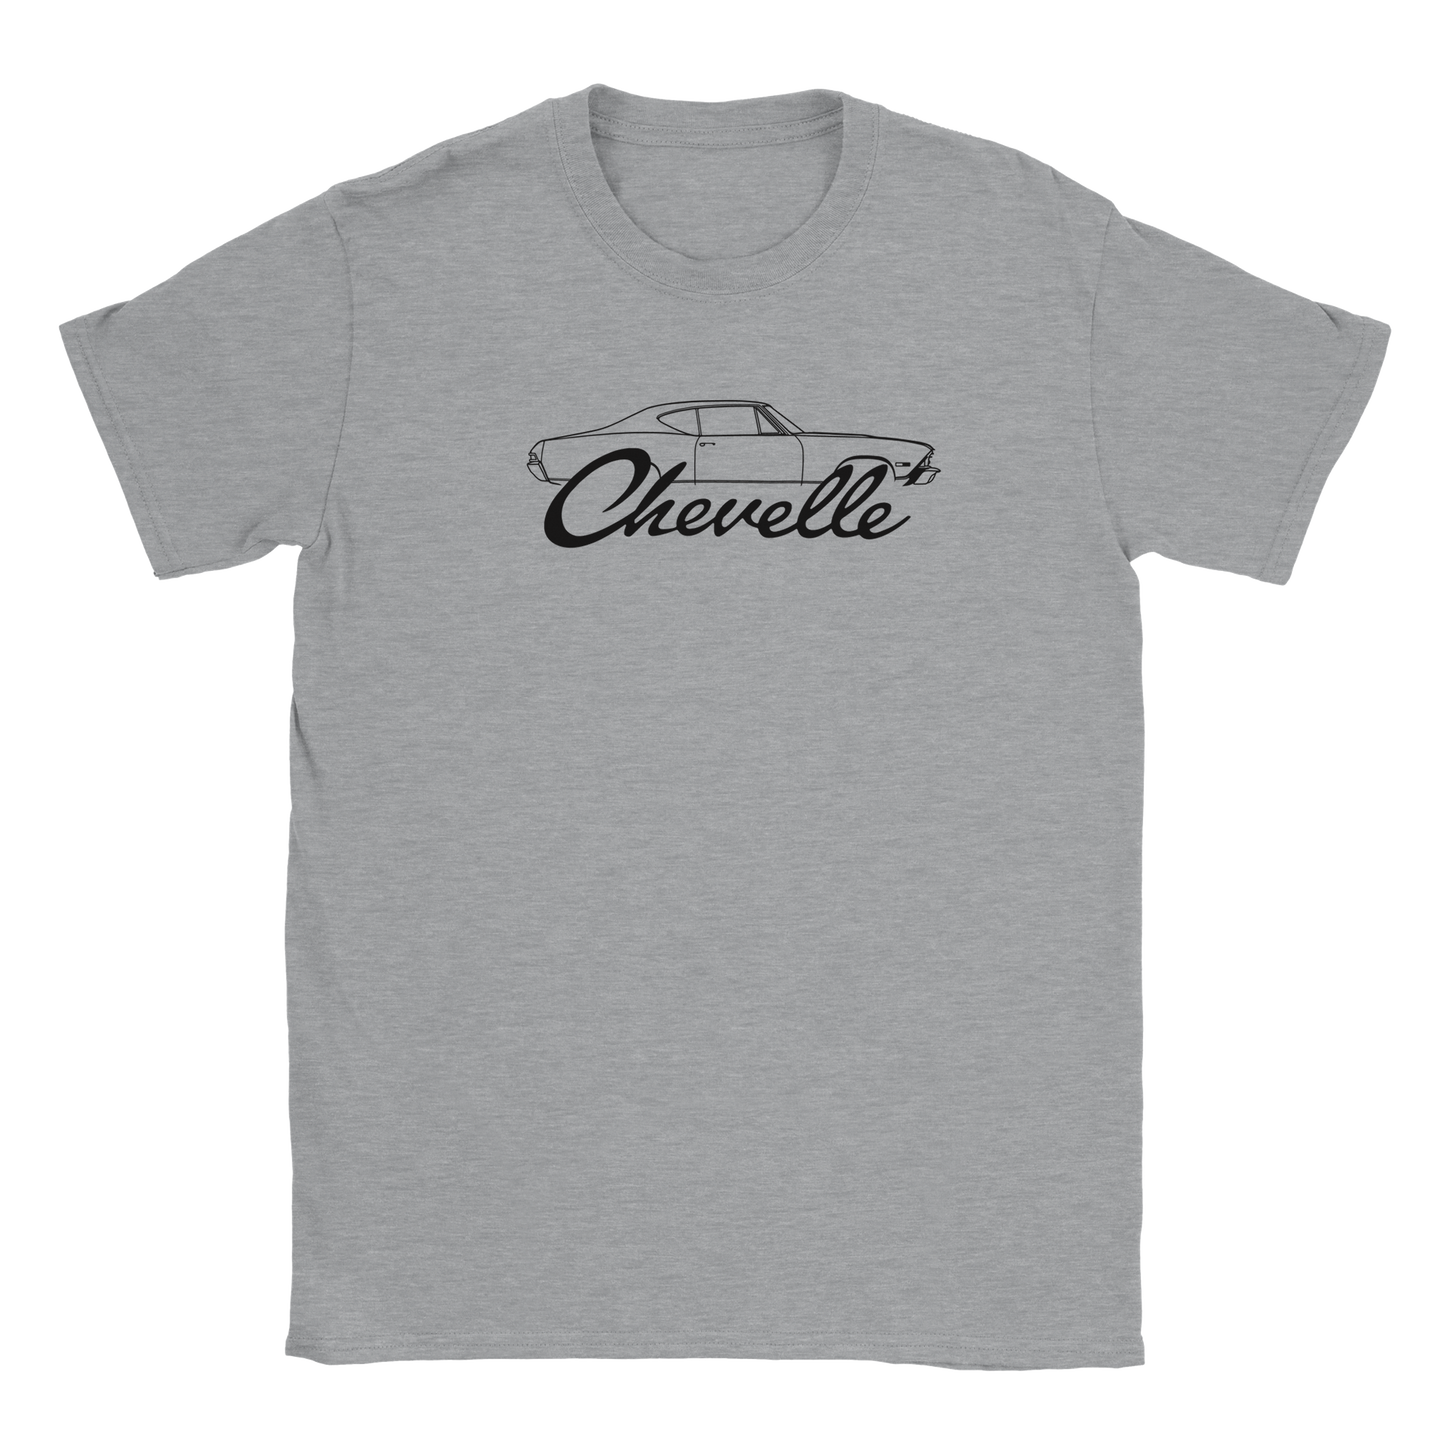 a grey chevrolet t - shirt with the word chevrolet on it